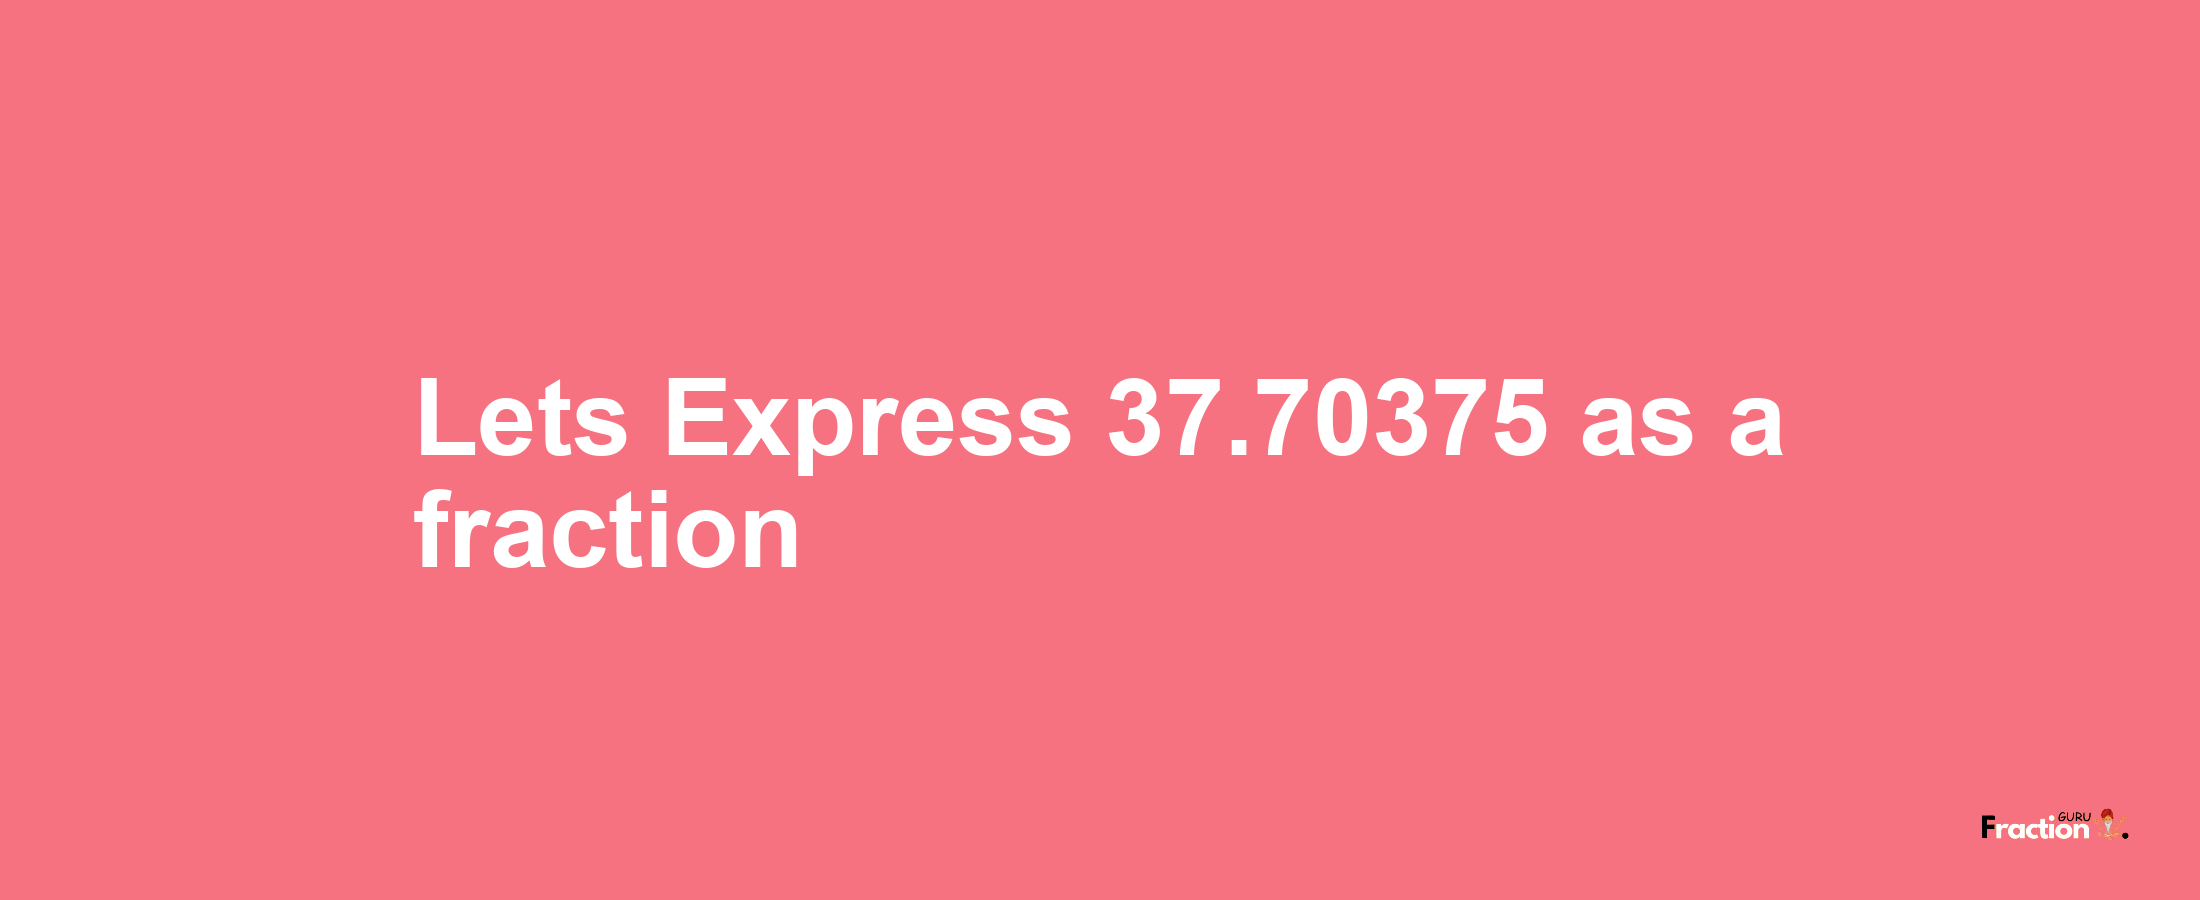 Lets Express 37.70375 as afraction